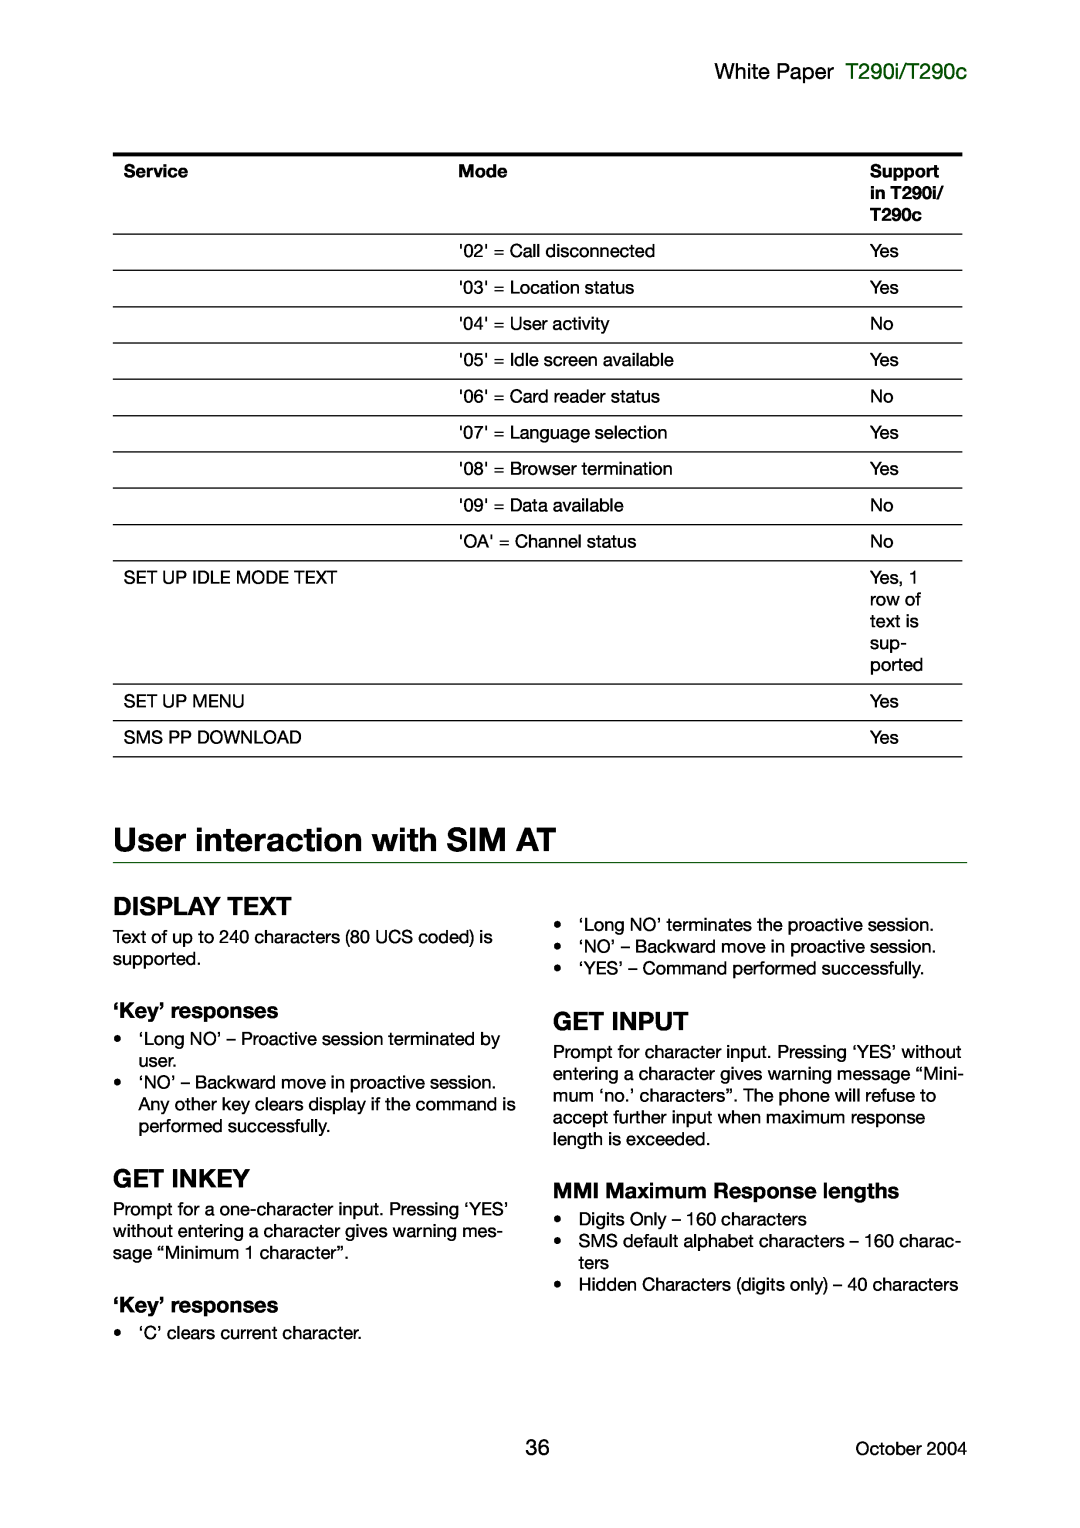 Sony Ericsson manual User interaction with SIM AT, Display Text, Get Inkey, Get Input, White Paper T290i/T290c 